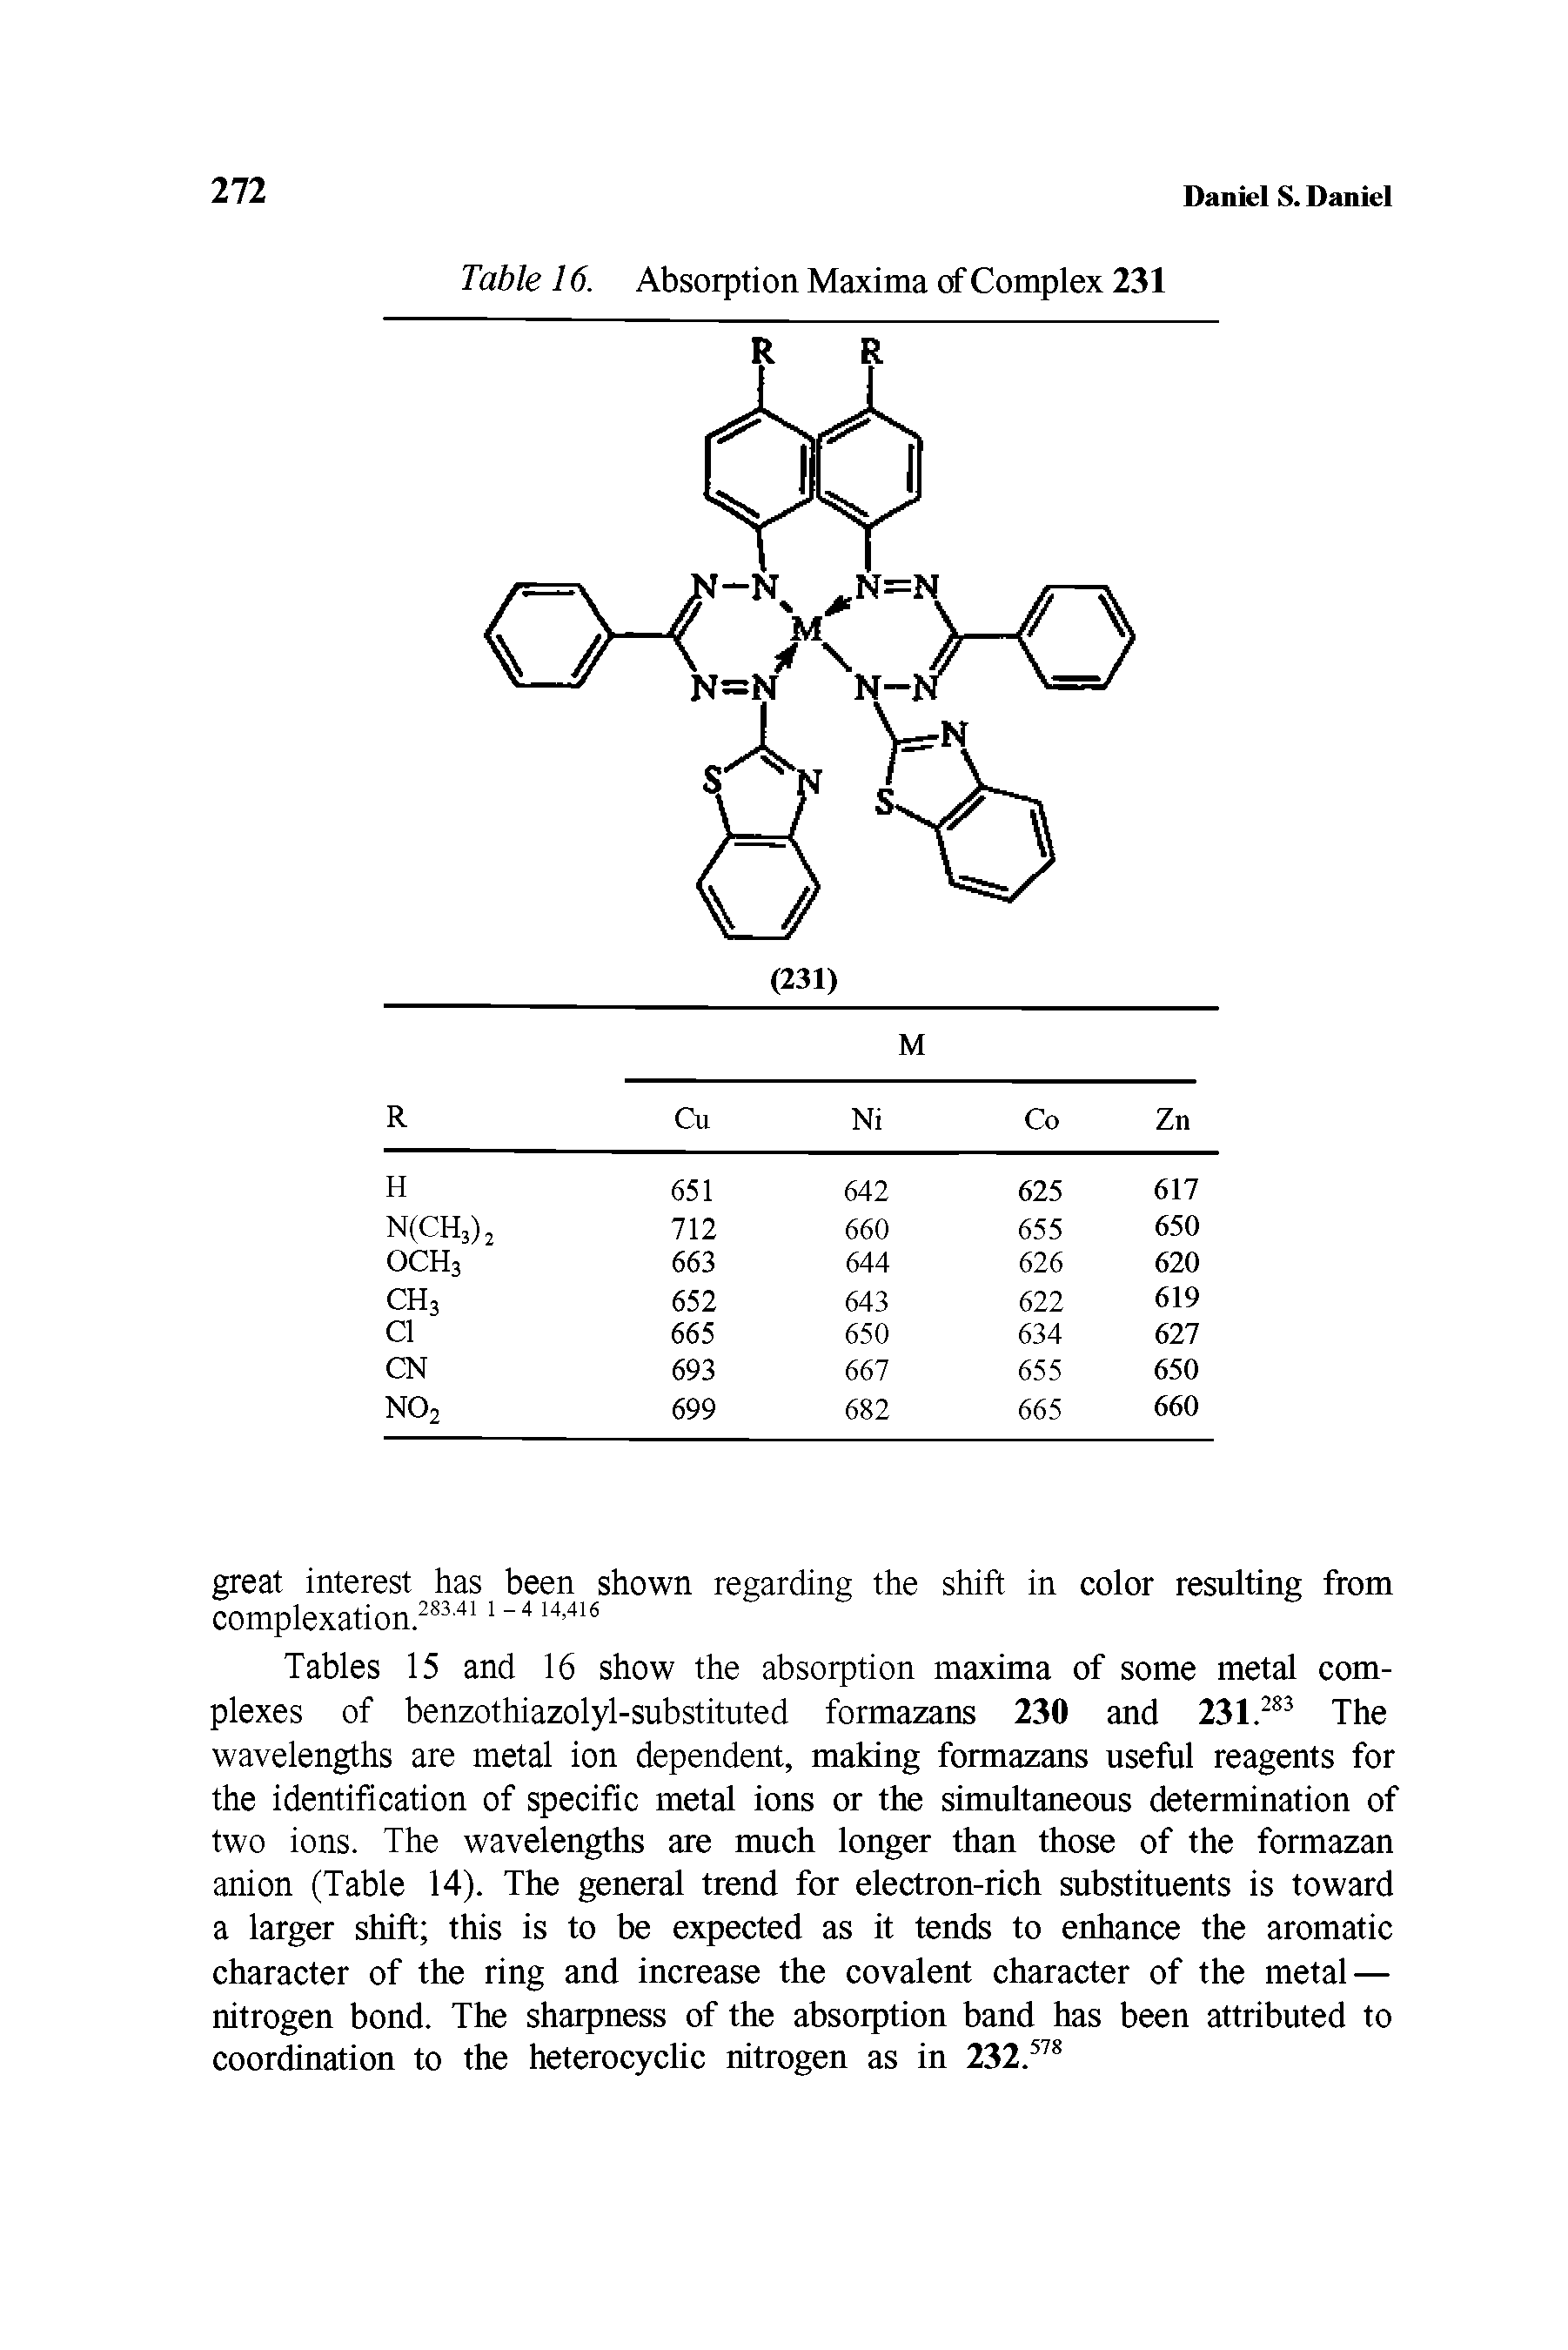 Tables 15 and 16 show the absorption maxima of some metal complexes of benzothiazolyl-substituted formazans 230 and 231.283 The wavelengths are metal ion dependent, making formazans useful reagents for the identification of specific metal ions or the simultaneous determination of two ions. The wavelengths are much longer than those of the formazan anion (Table 14). The general trend for electron-rich substituents is toward a larger shift this is to be expected as it tends to enhance the aromatic character of the ring and increase the covalent character of the metal — nitrogen bond. The sharpness of the absorption band has been attributed to coordination to the heterocyclic nitrogen as in 232.57S...